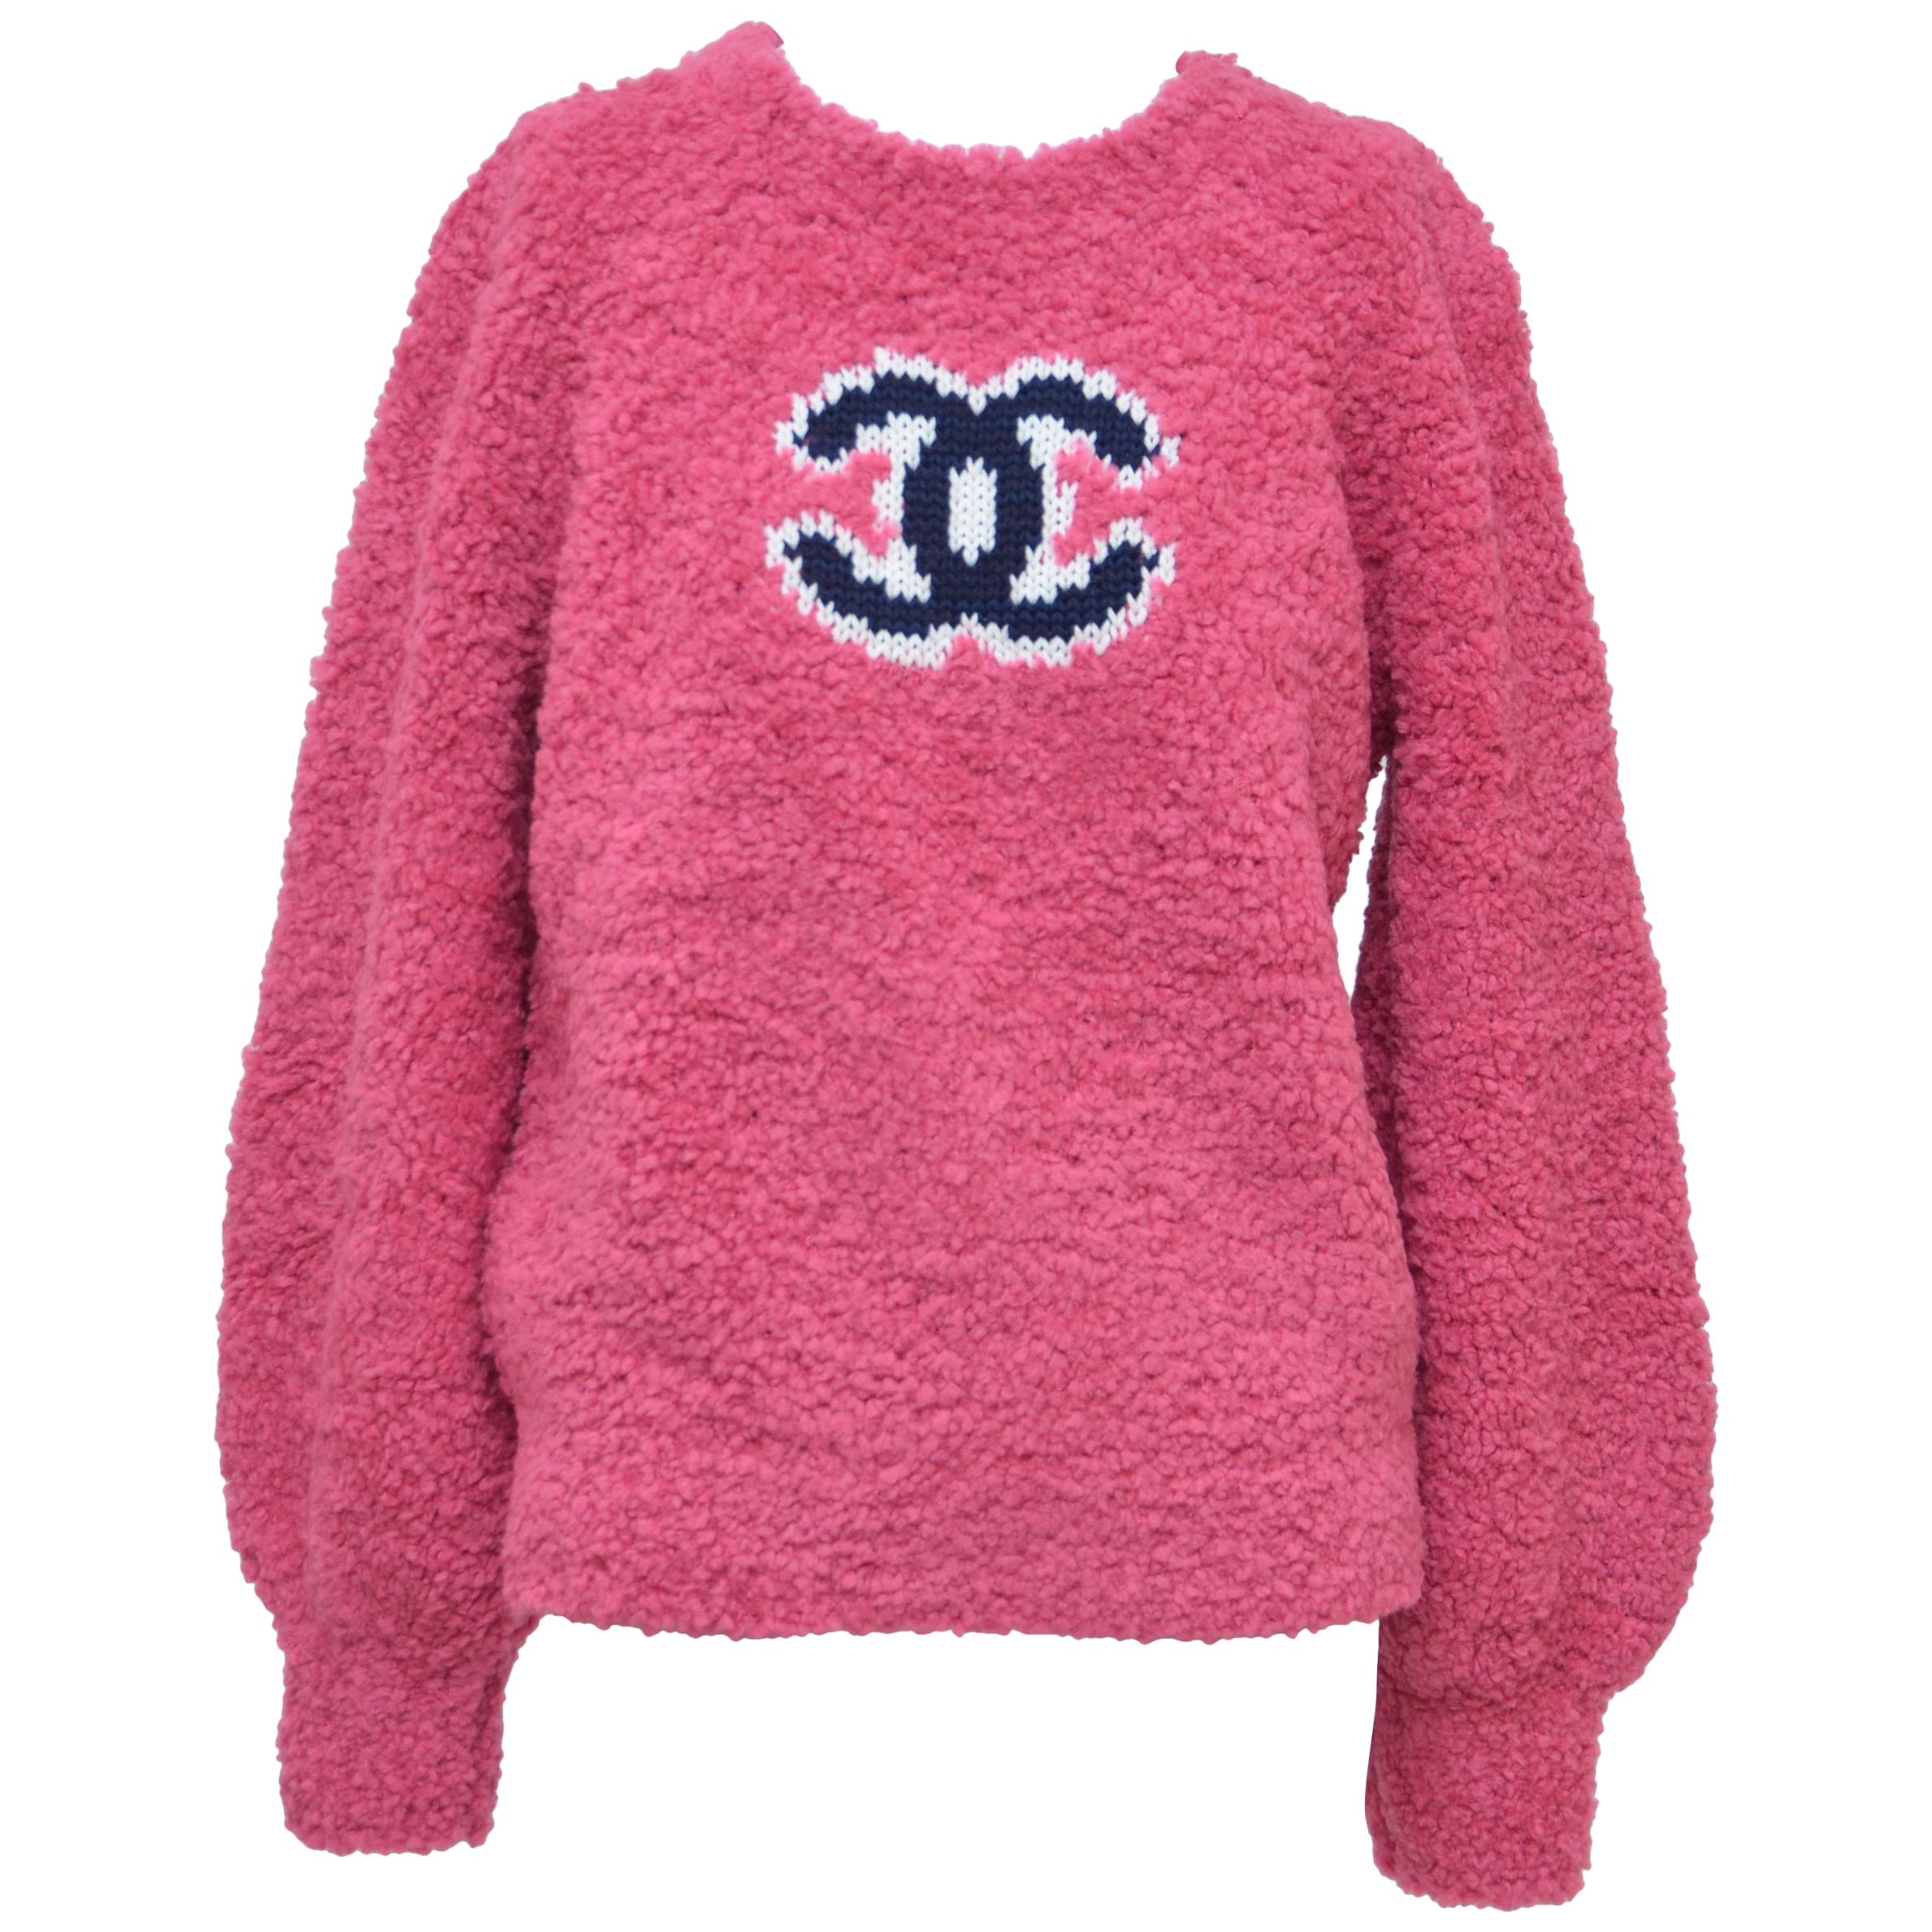 CHANEL CC Pink Teddy Sweater Jumper NEW Size 40FR